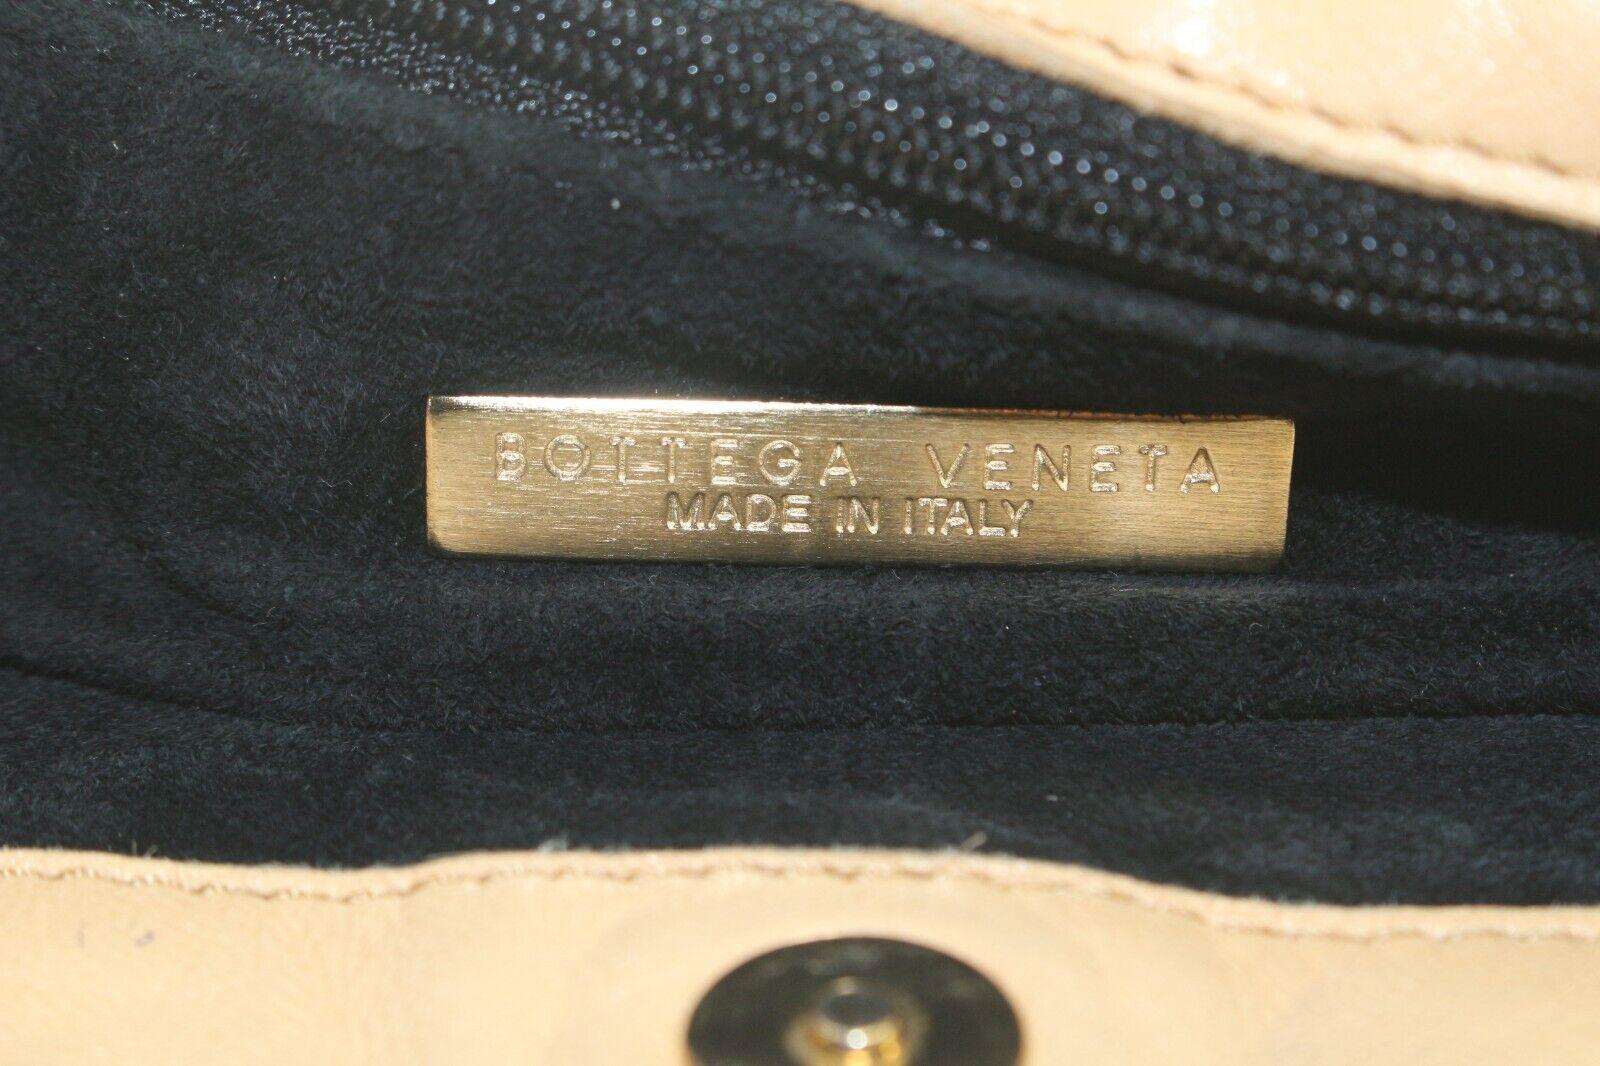 
Date Code/Serial Number: N/A

Made In: Italy

Measurements: Length:  12